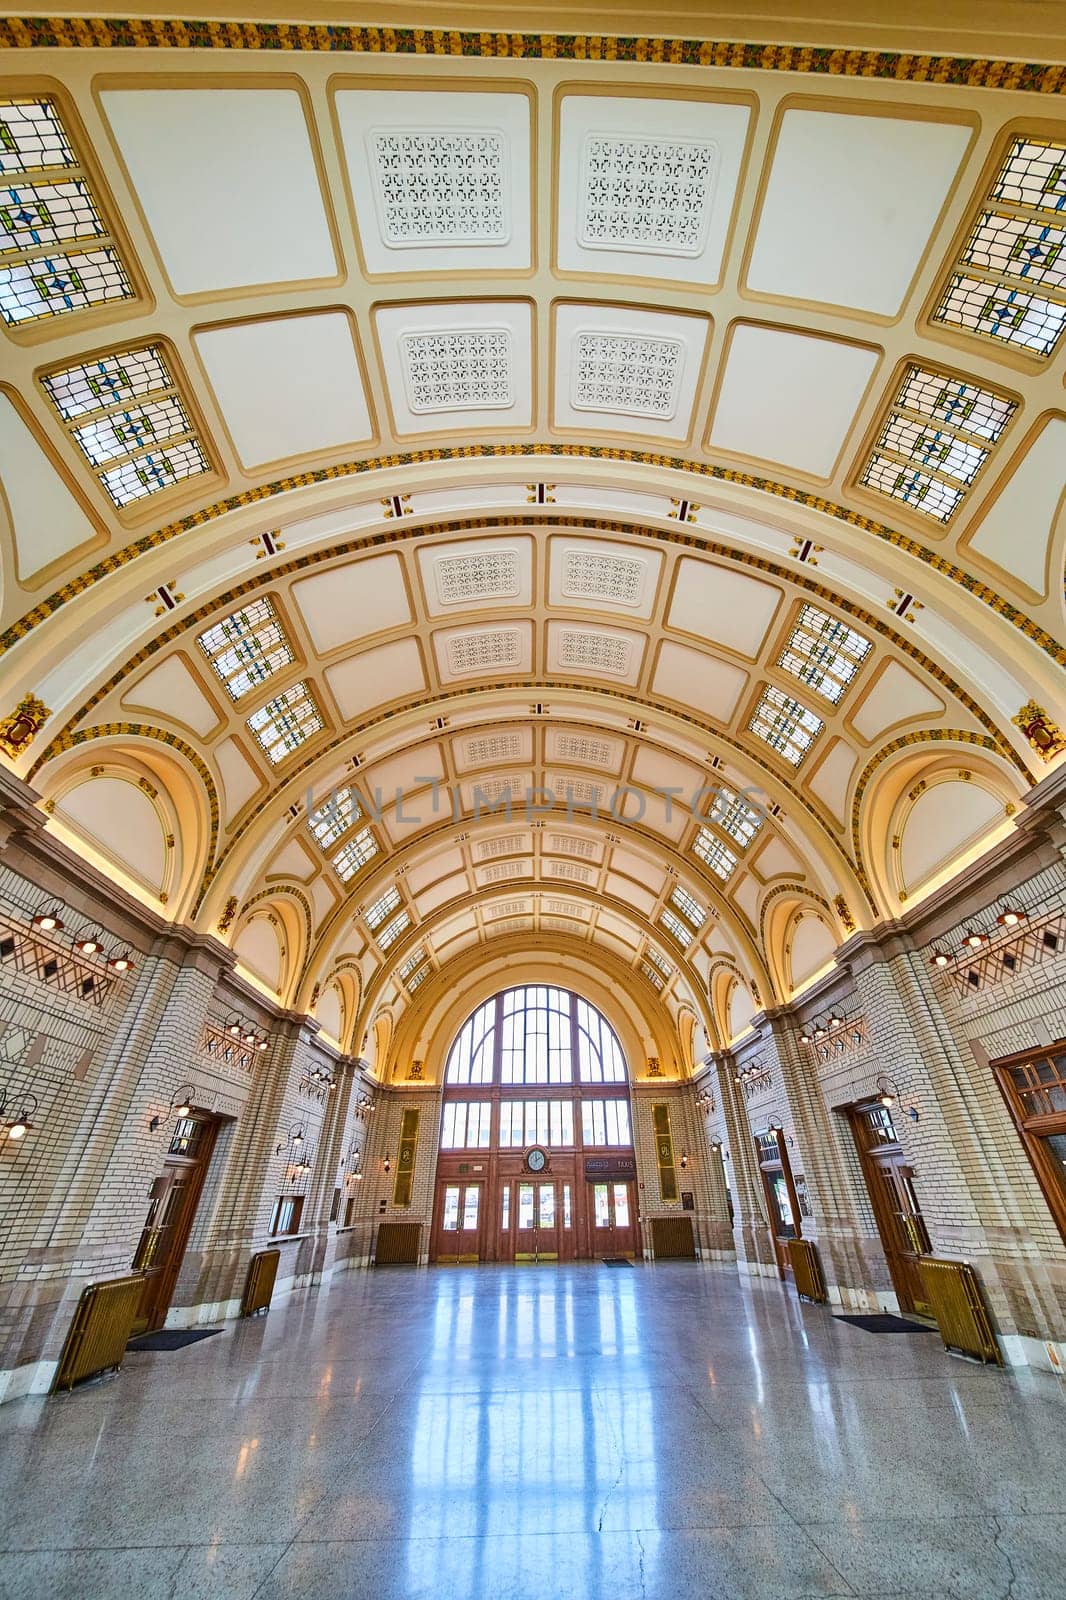 Elegant Baker Street Station interior, Fort Wayne, with ornate stained glass and grand arches, embodying historical grandeur.